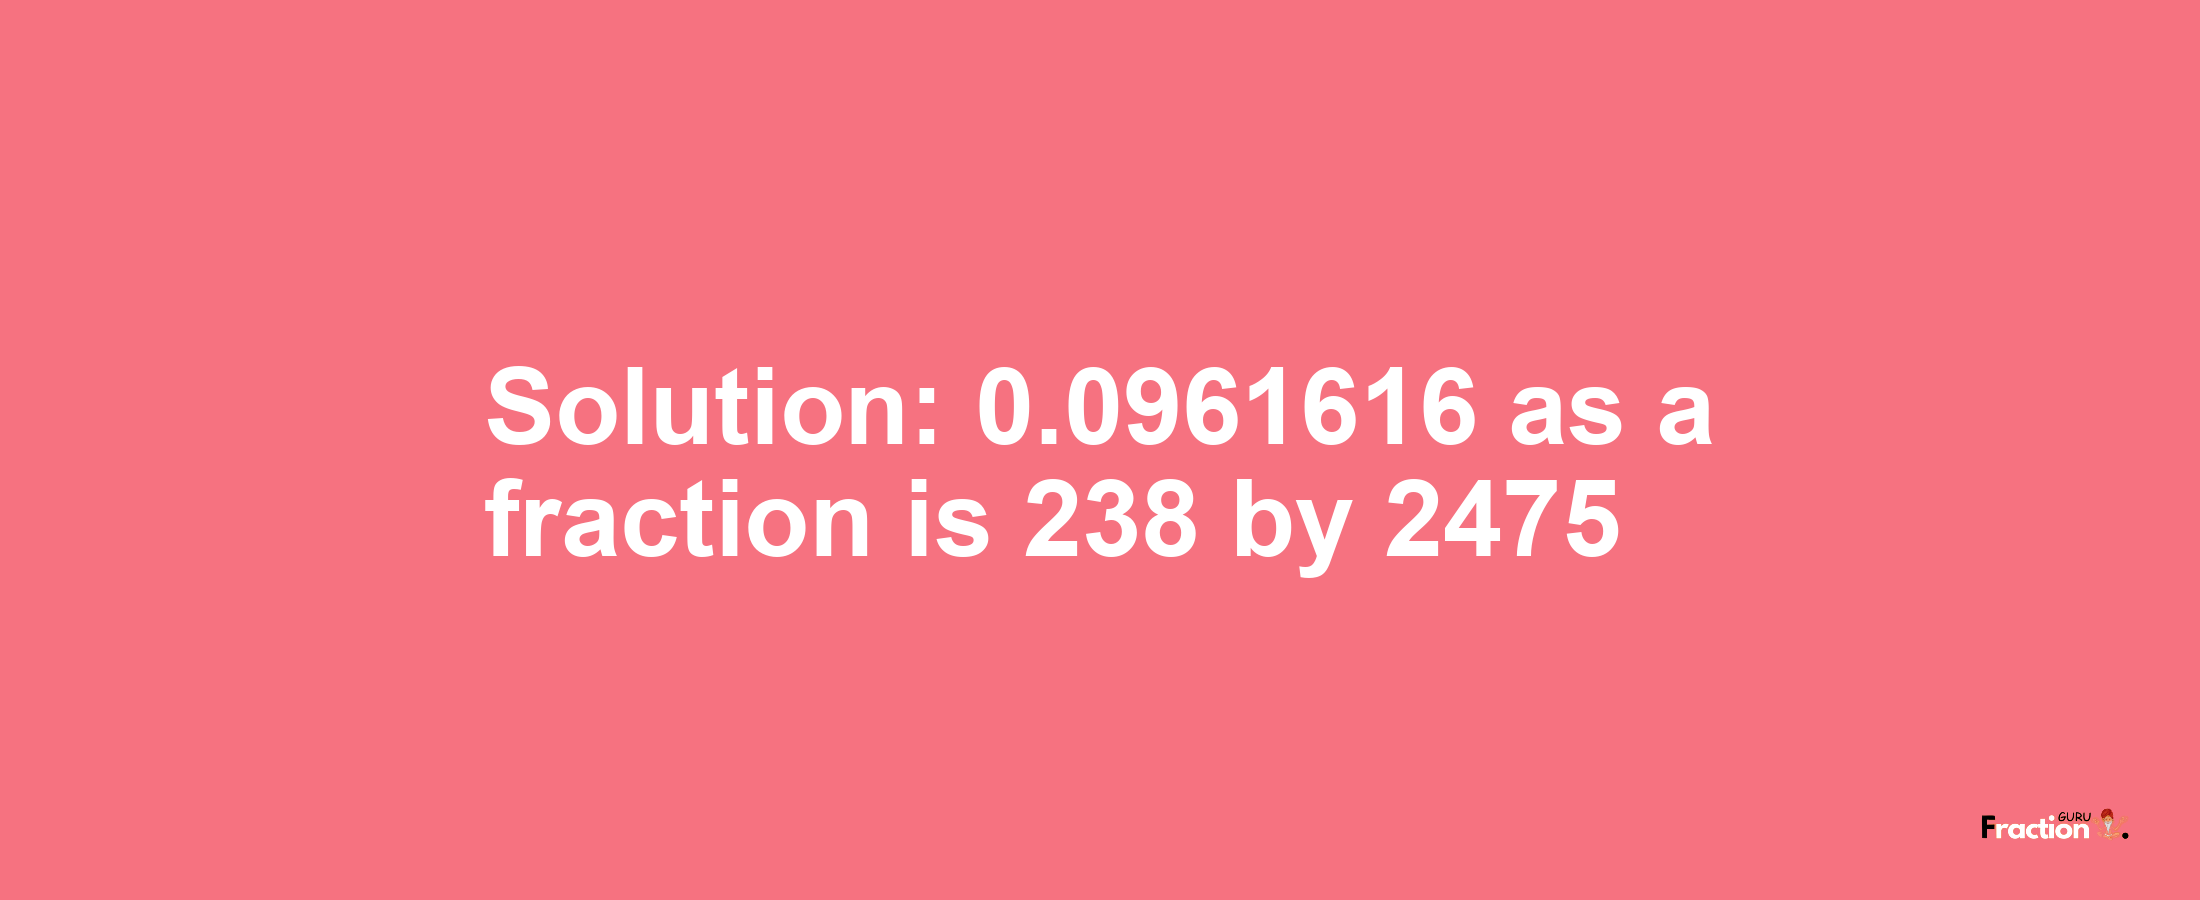 Solution:0.0961616 as a fraction is 238/2475